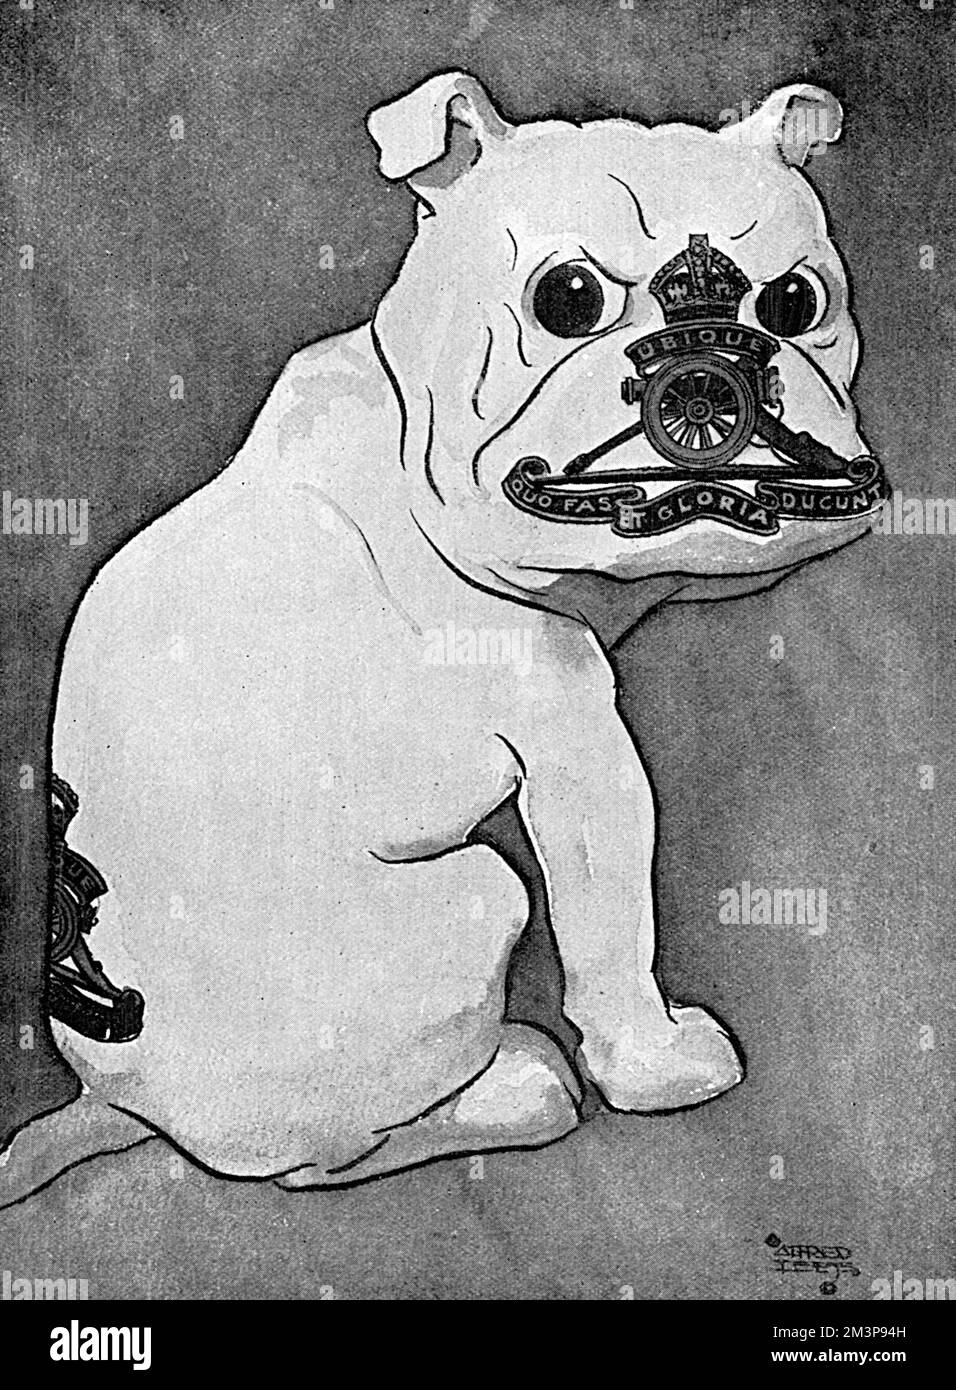 Masbadges!  Regimental mascots and badges in one!  No. 10 The bulldog of the Royal Artillery.       Date: 1918 Stock Photo